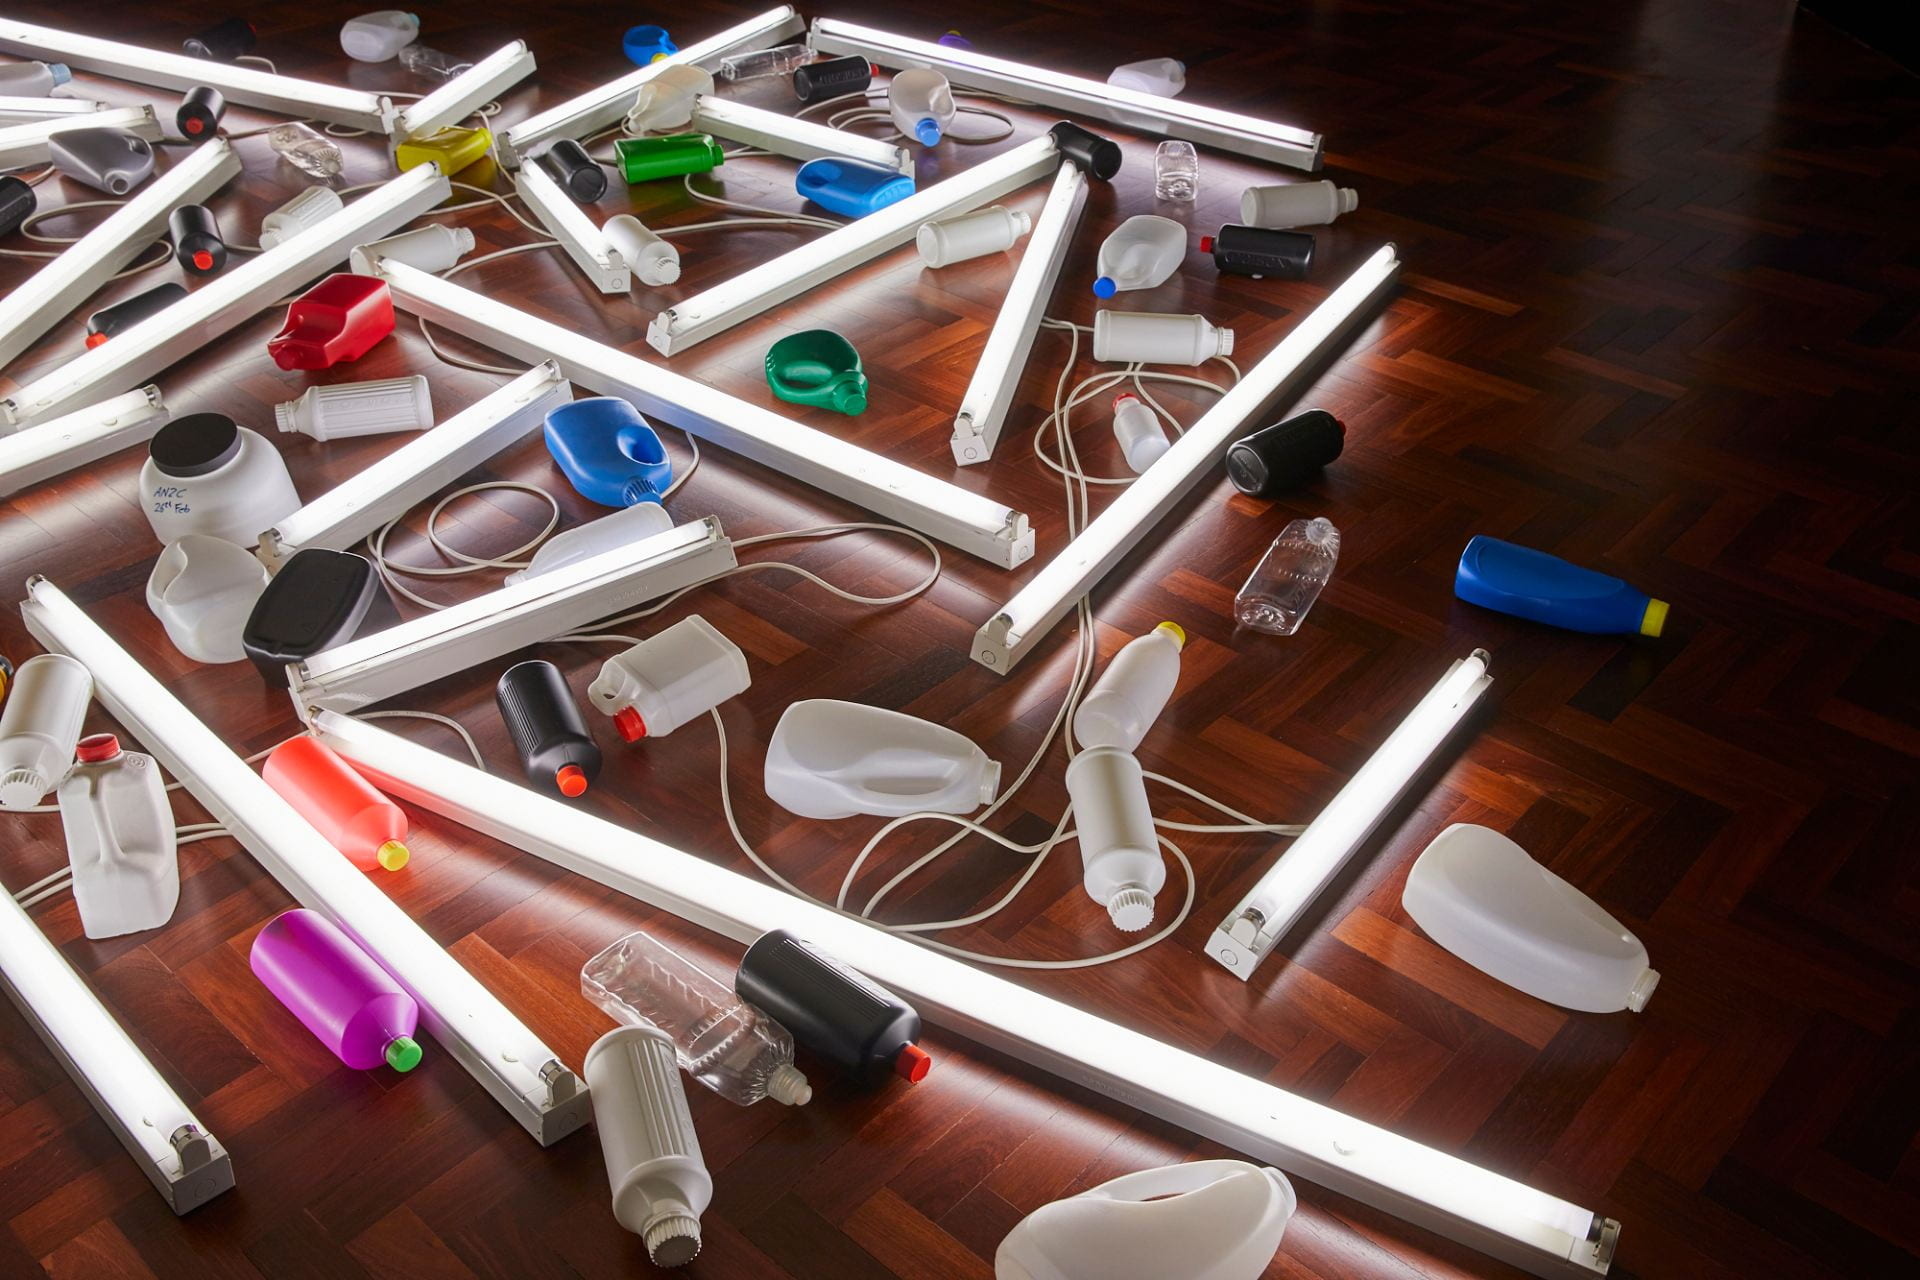 Close-up of an assortment of plastic bottles and tubular fluorescent lights arranged diagonally on a wooden floor.